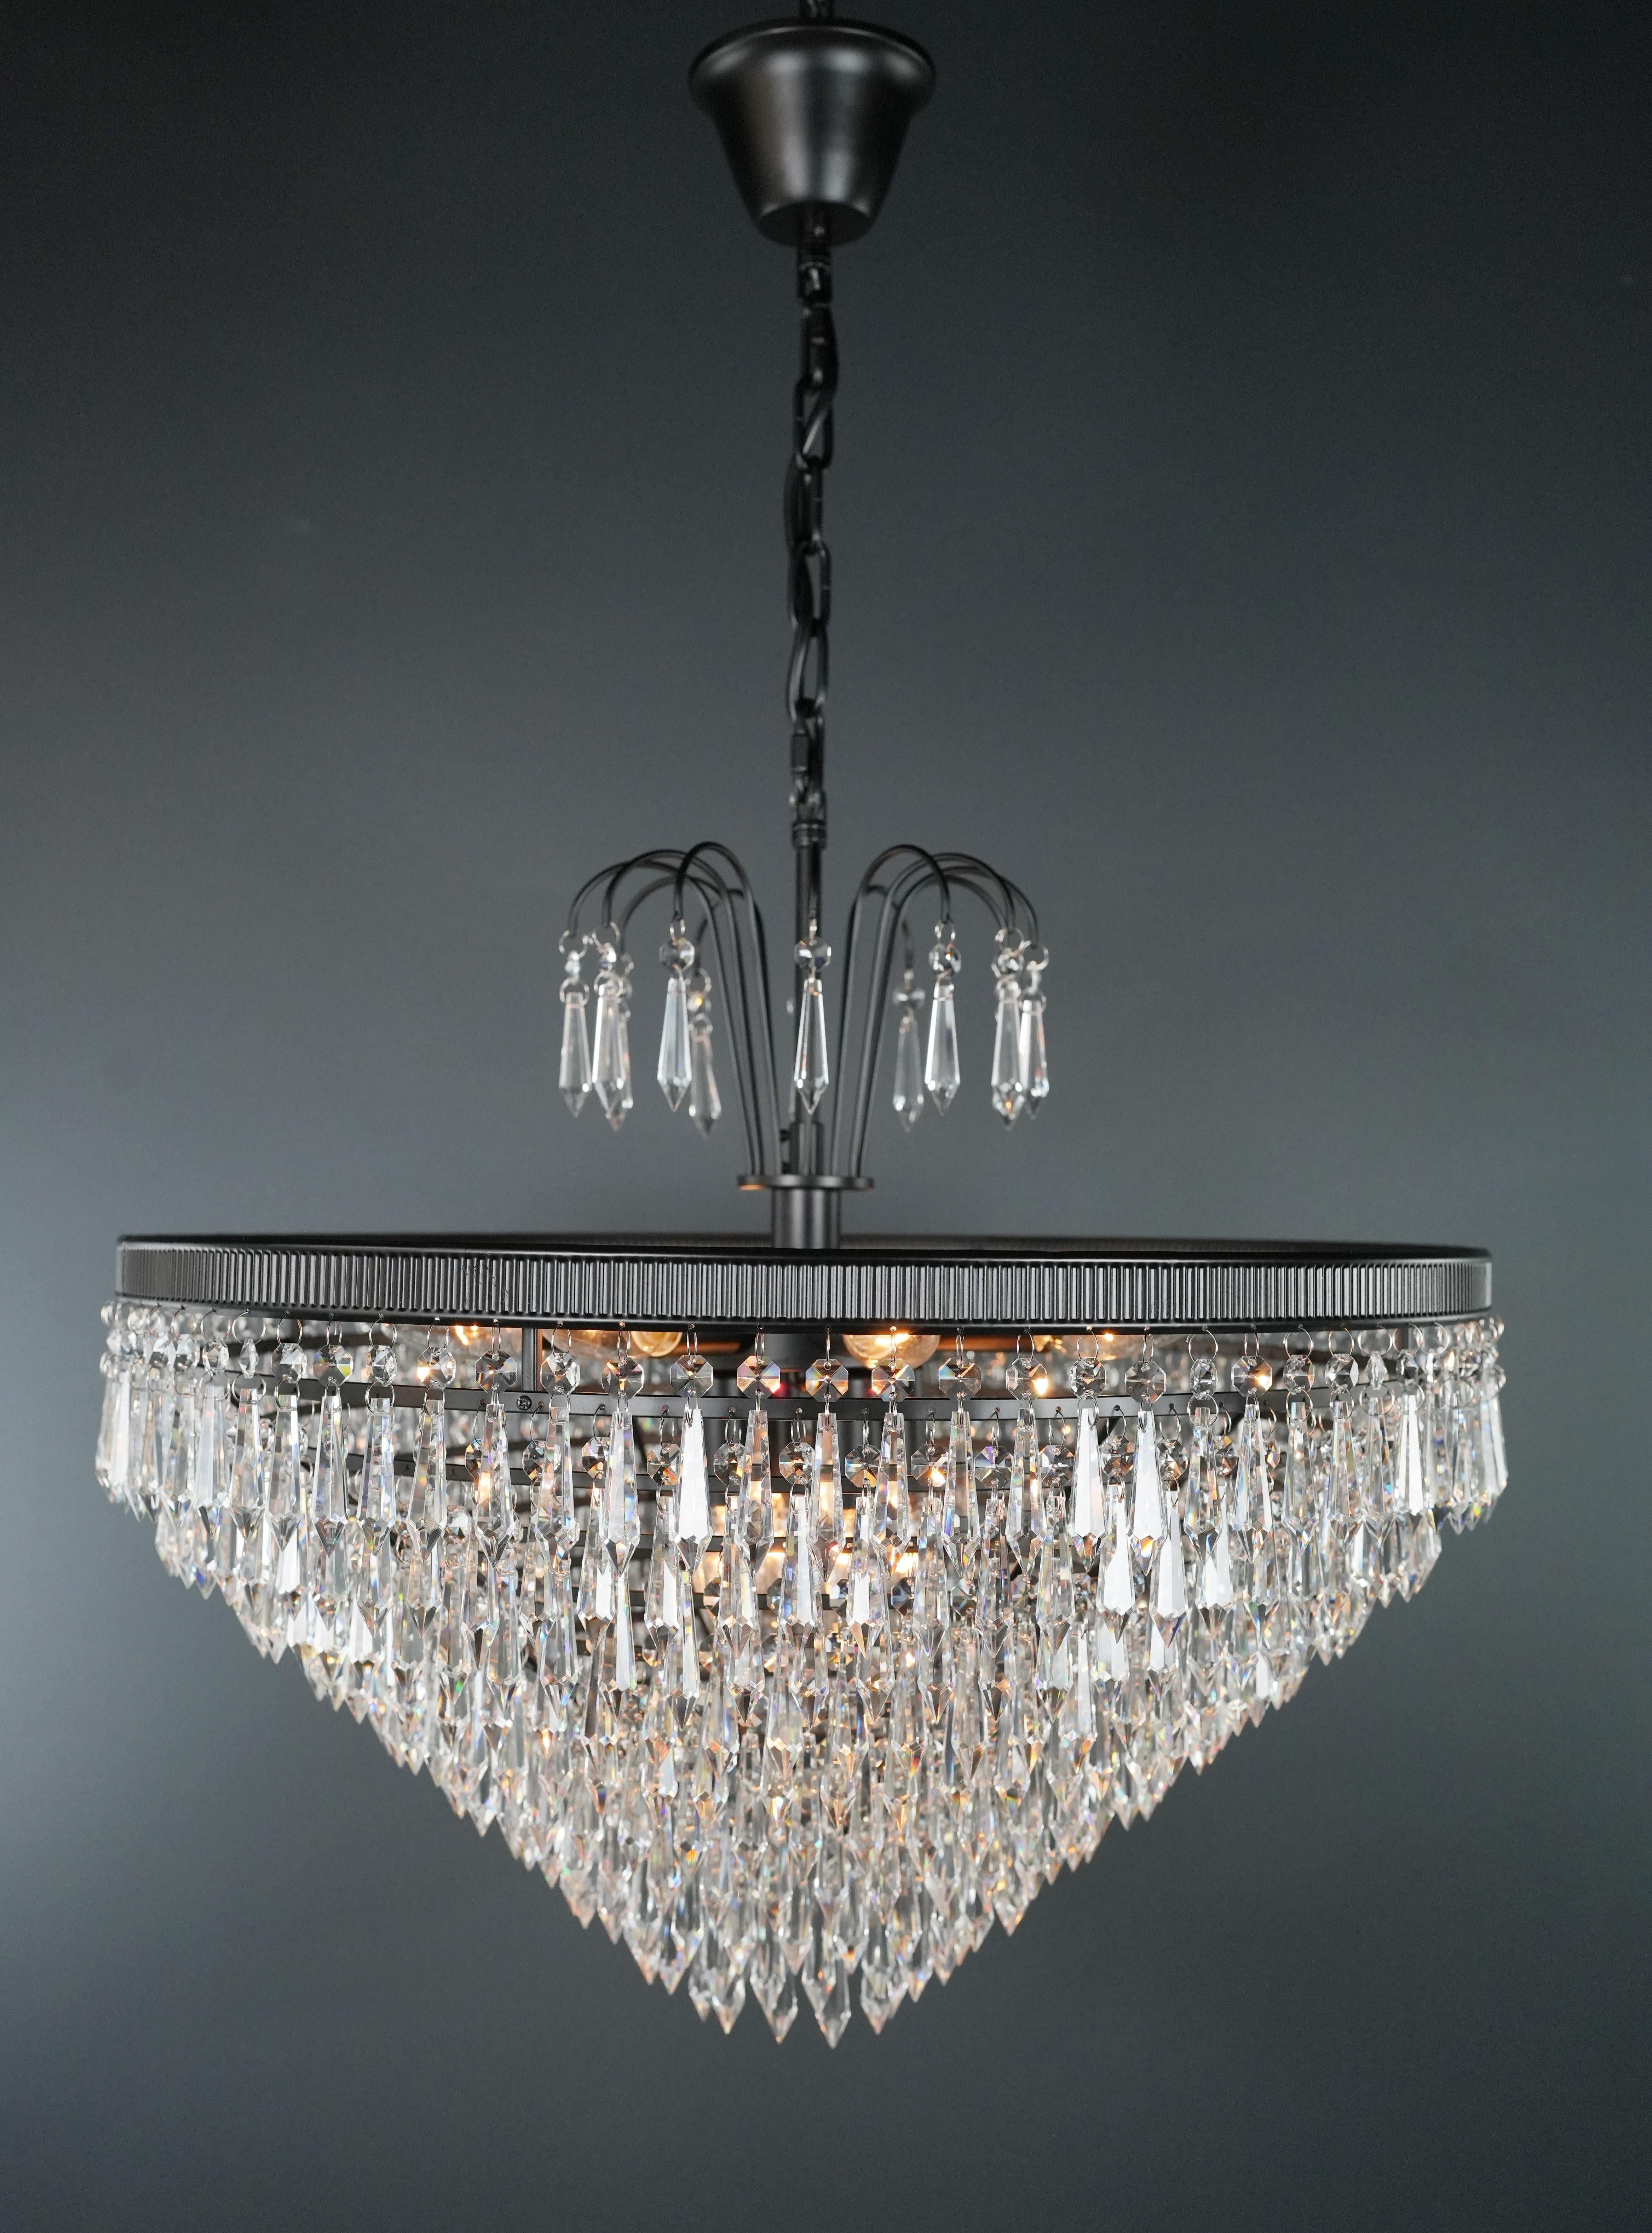 our lead crystal chandelier is a testament to opulence and craftsmanship. Crafted in-house, we offer the flexibility of both smaller and larger sizes, ensuring the perfect fit for your space. 

Key Features:
- Measures: Diameter 60 cm, Height 60